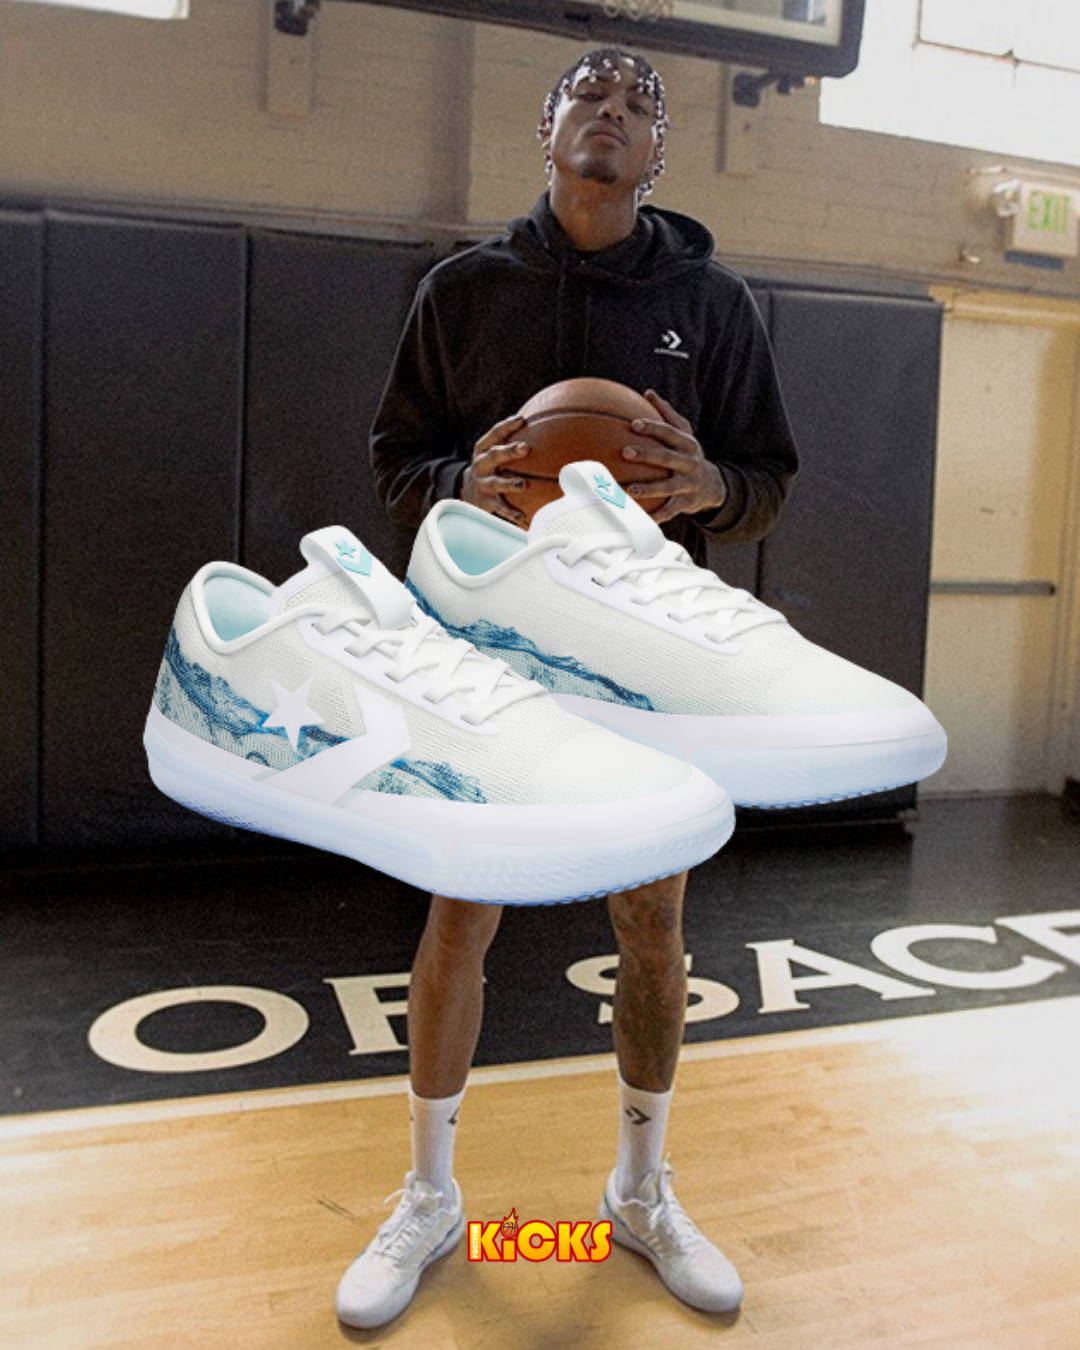 Official Foot on Twitter: "Kelly Oubre Jr x Converse All Star Pro Low 🌊 OUT NOW Link&gt; https://t.co/7DbYRnTZfP https://t.co/9F1WtrcPpq" / Twitter